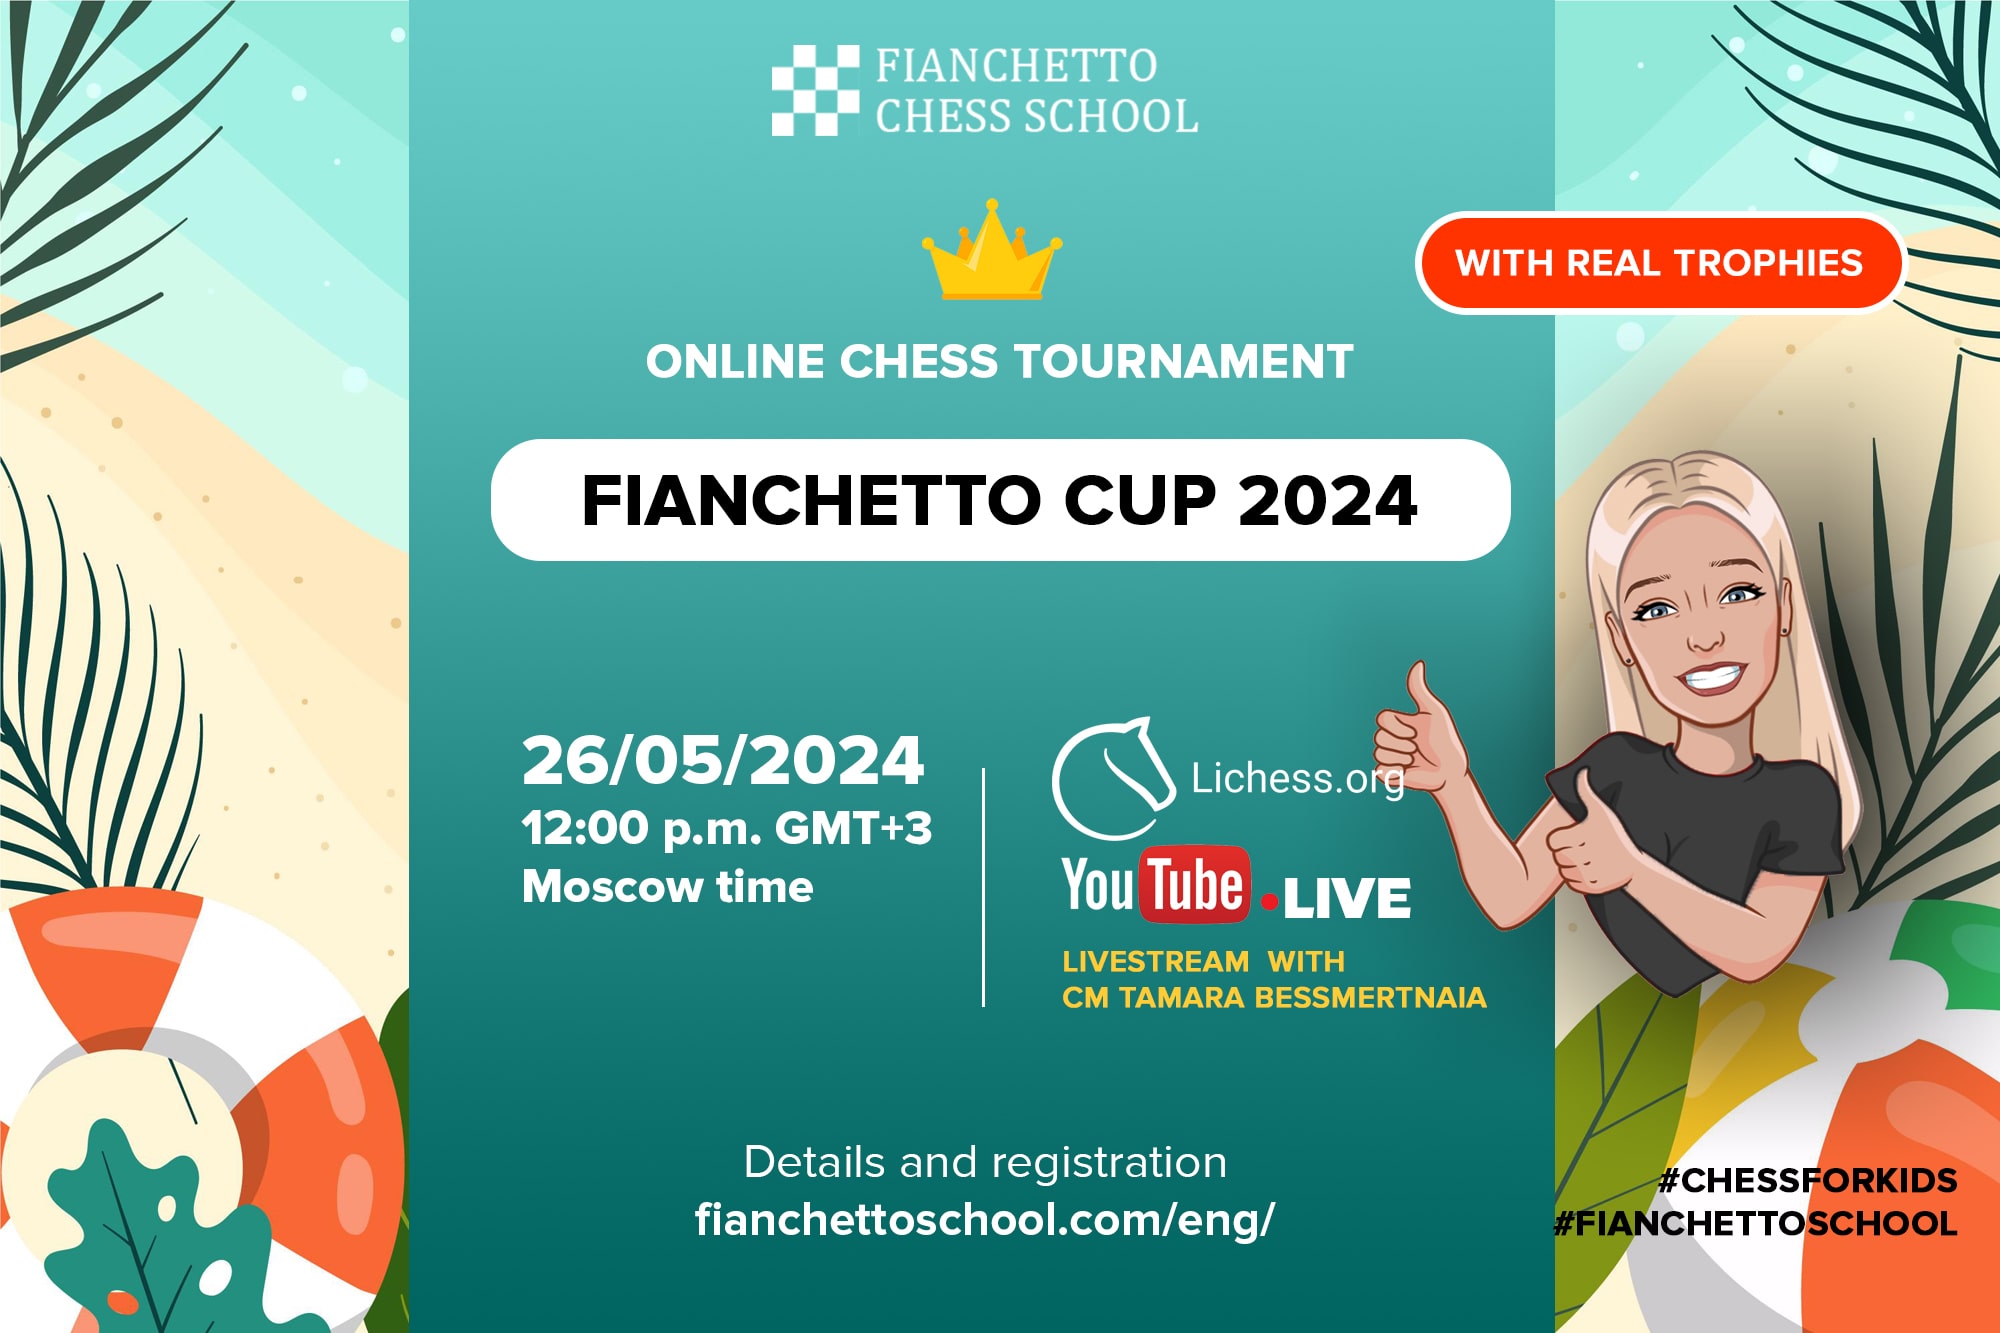 FIANCHETTO CUP 2024 - ONLINE YOUTH TOURNAMENT